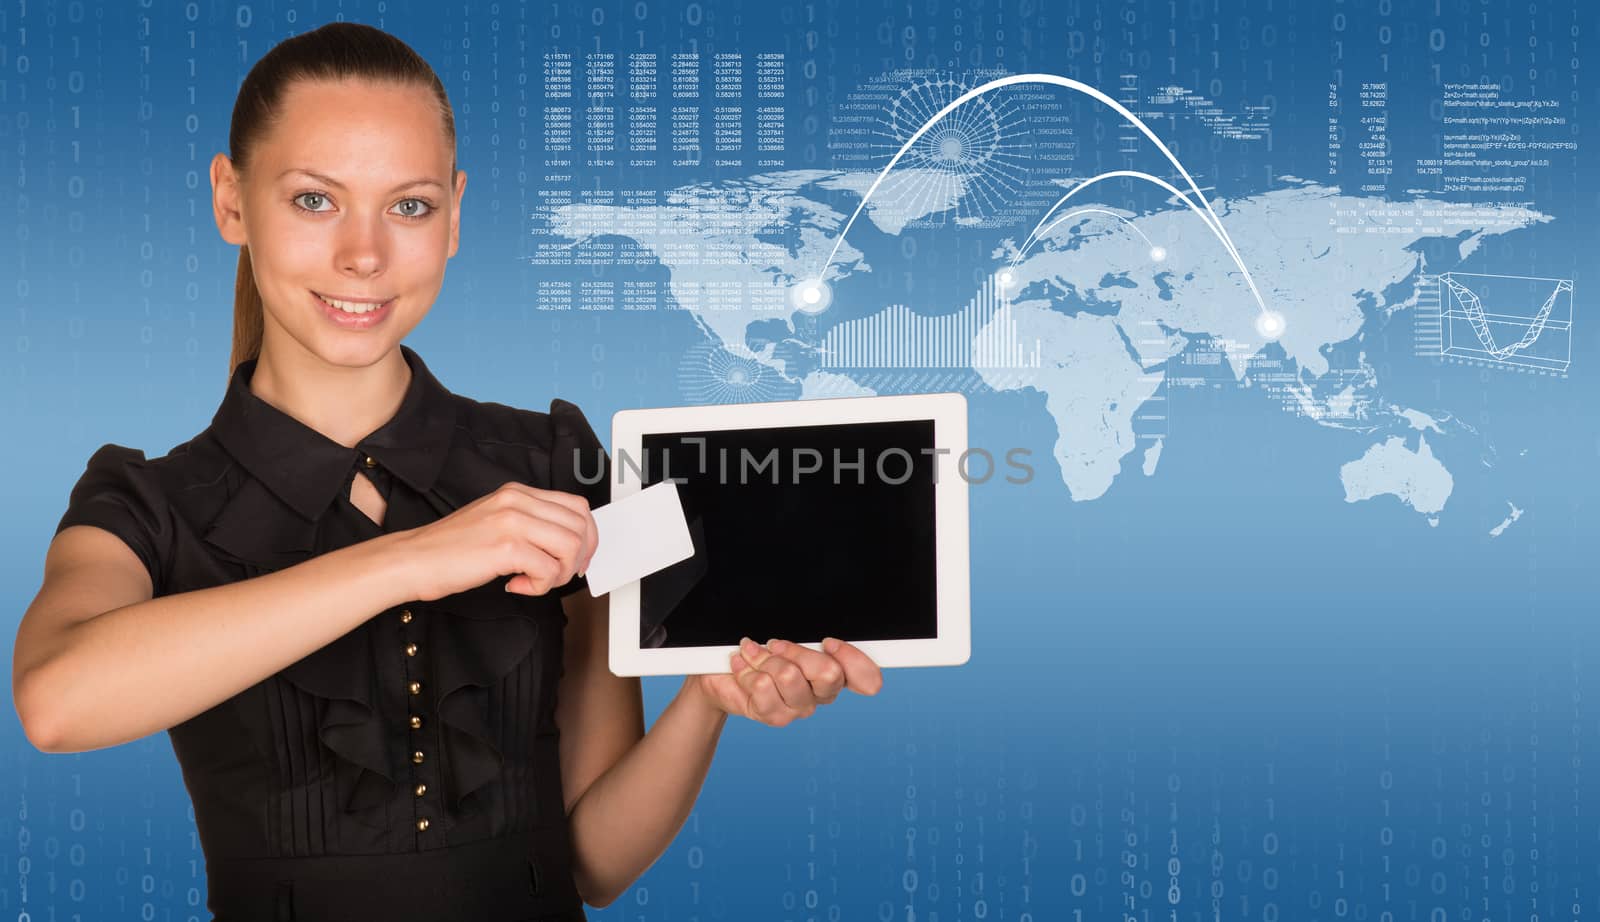 Beautiful businesswoman holding blank tablet PC and blank business card in front of PC screen. World map with conventional communication lines, figures and hi-tech graphs with various data as backdrop